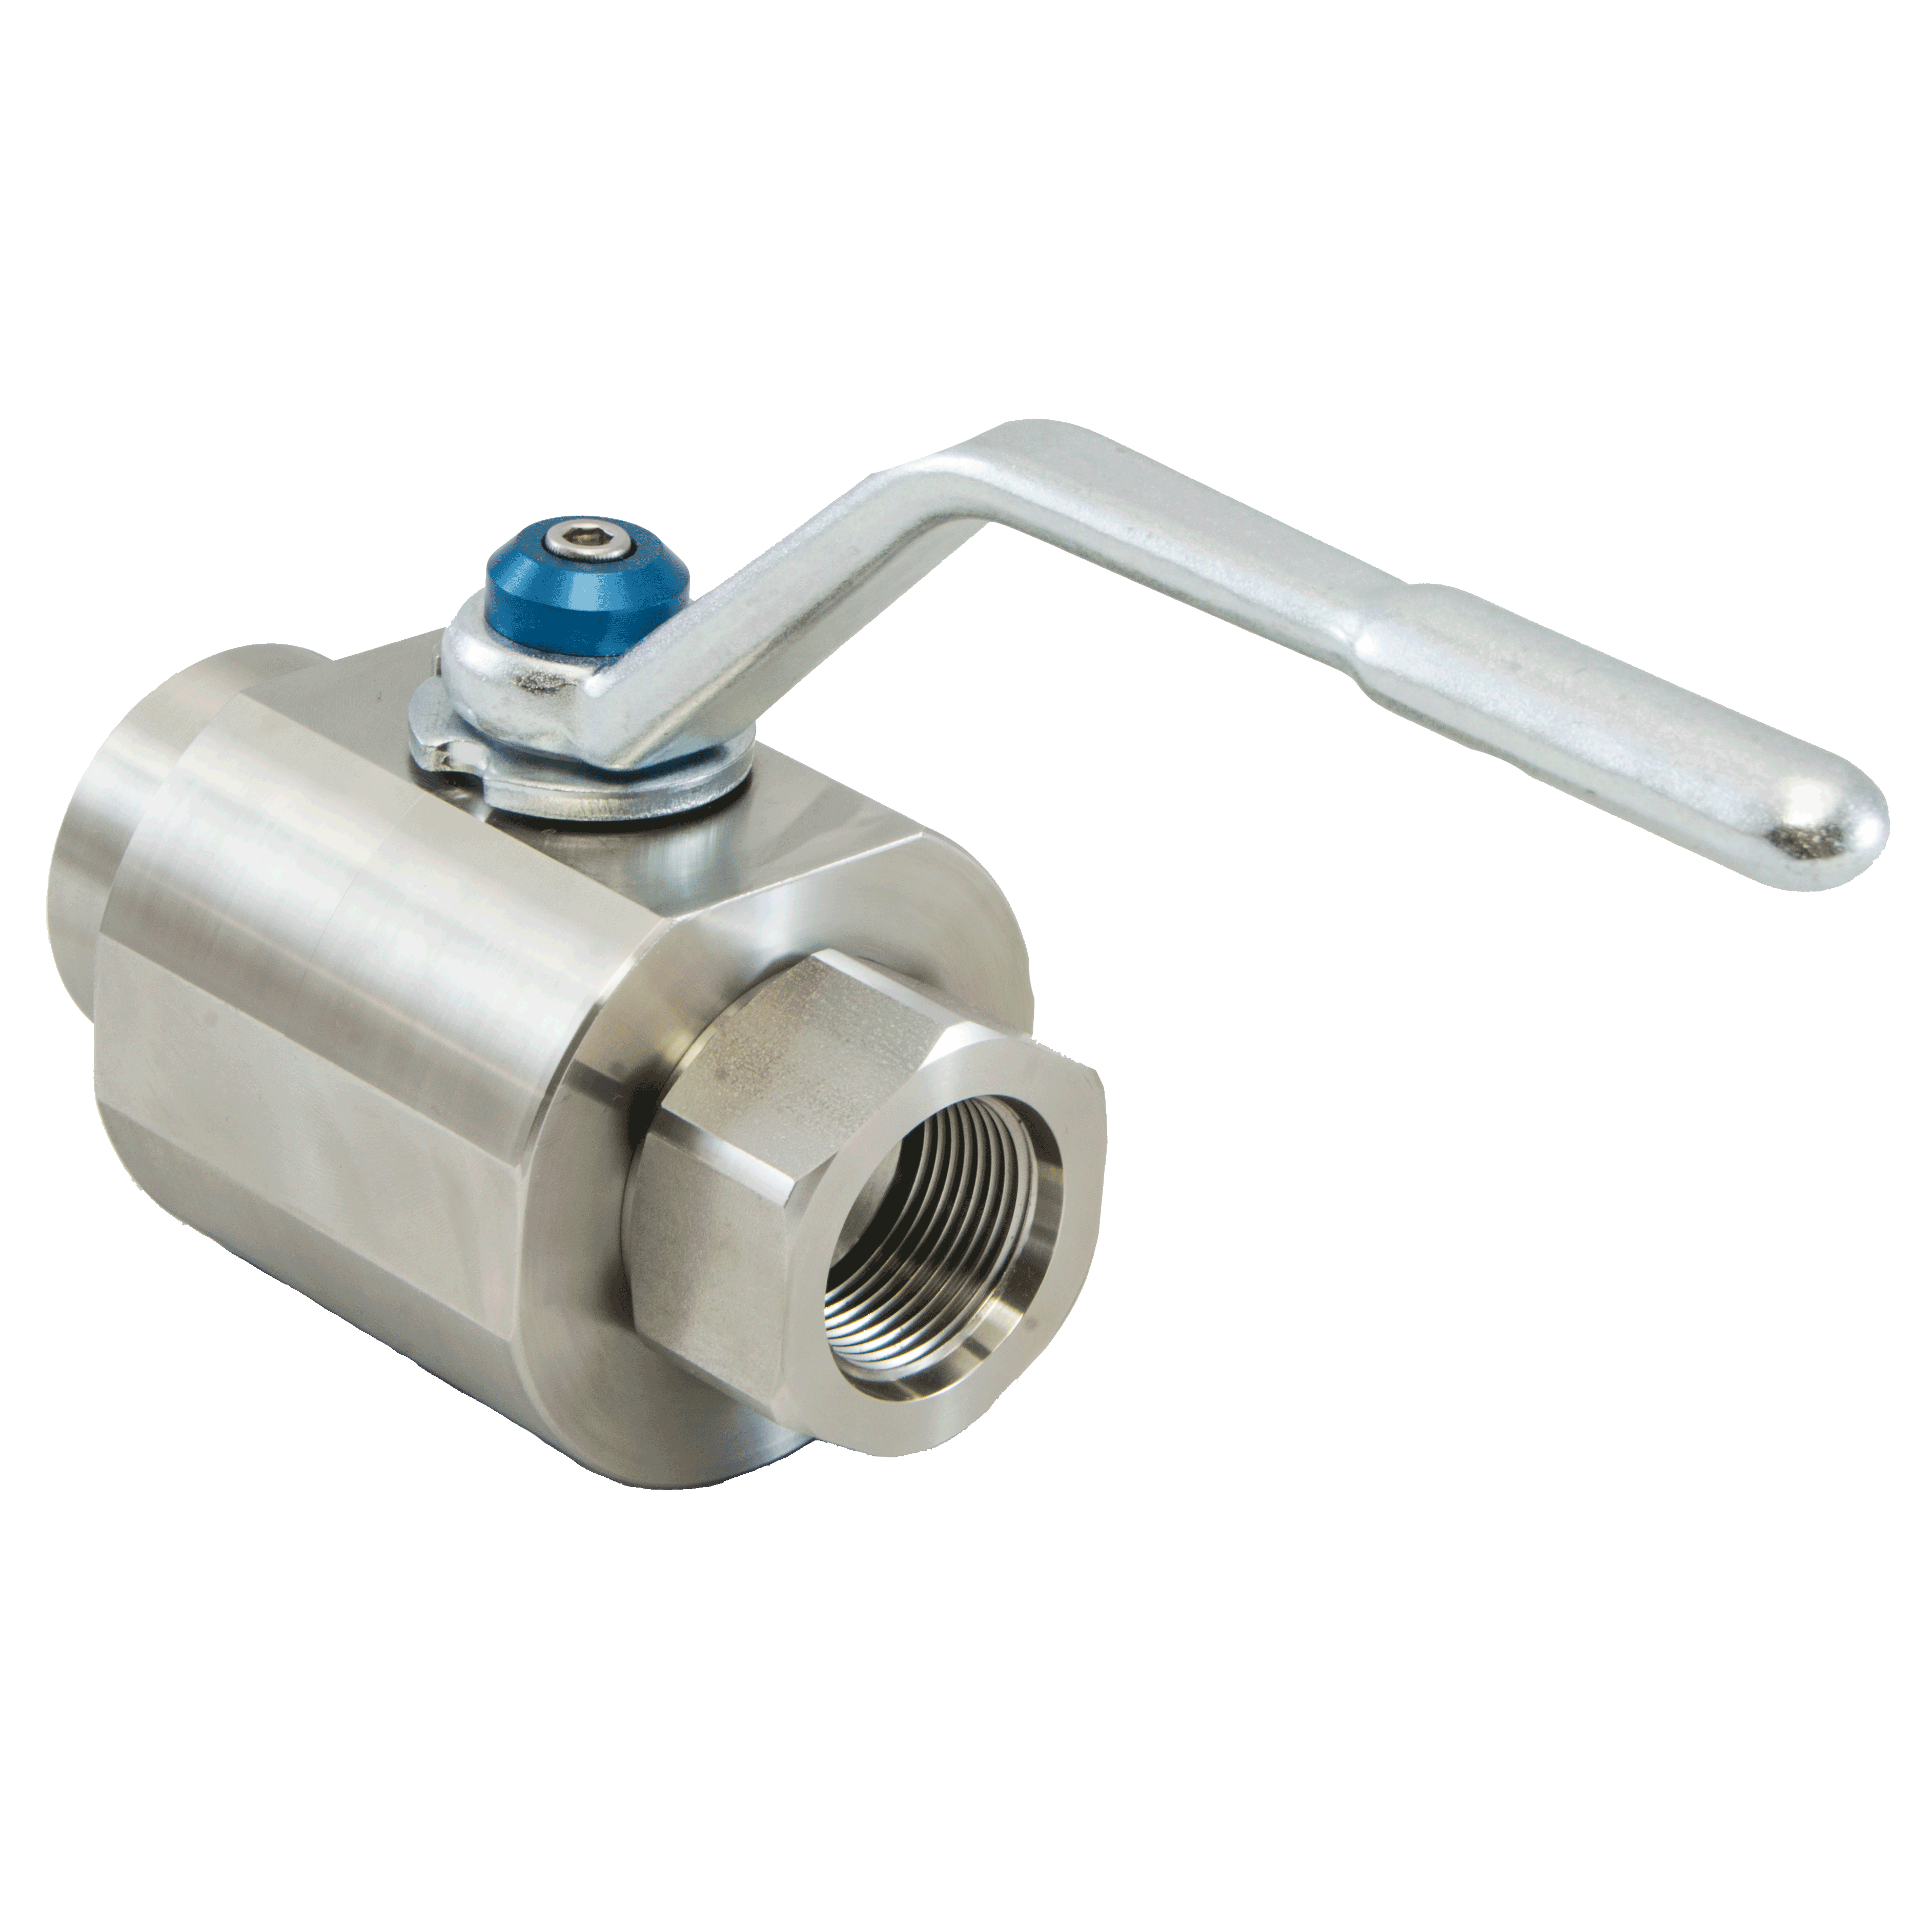 BVHS-1000S-2213 : DMIC Stainless Round Body Ball Valve, #16 SAE (1), 316 Stainless Steel, 6000psi, Two-Way